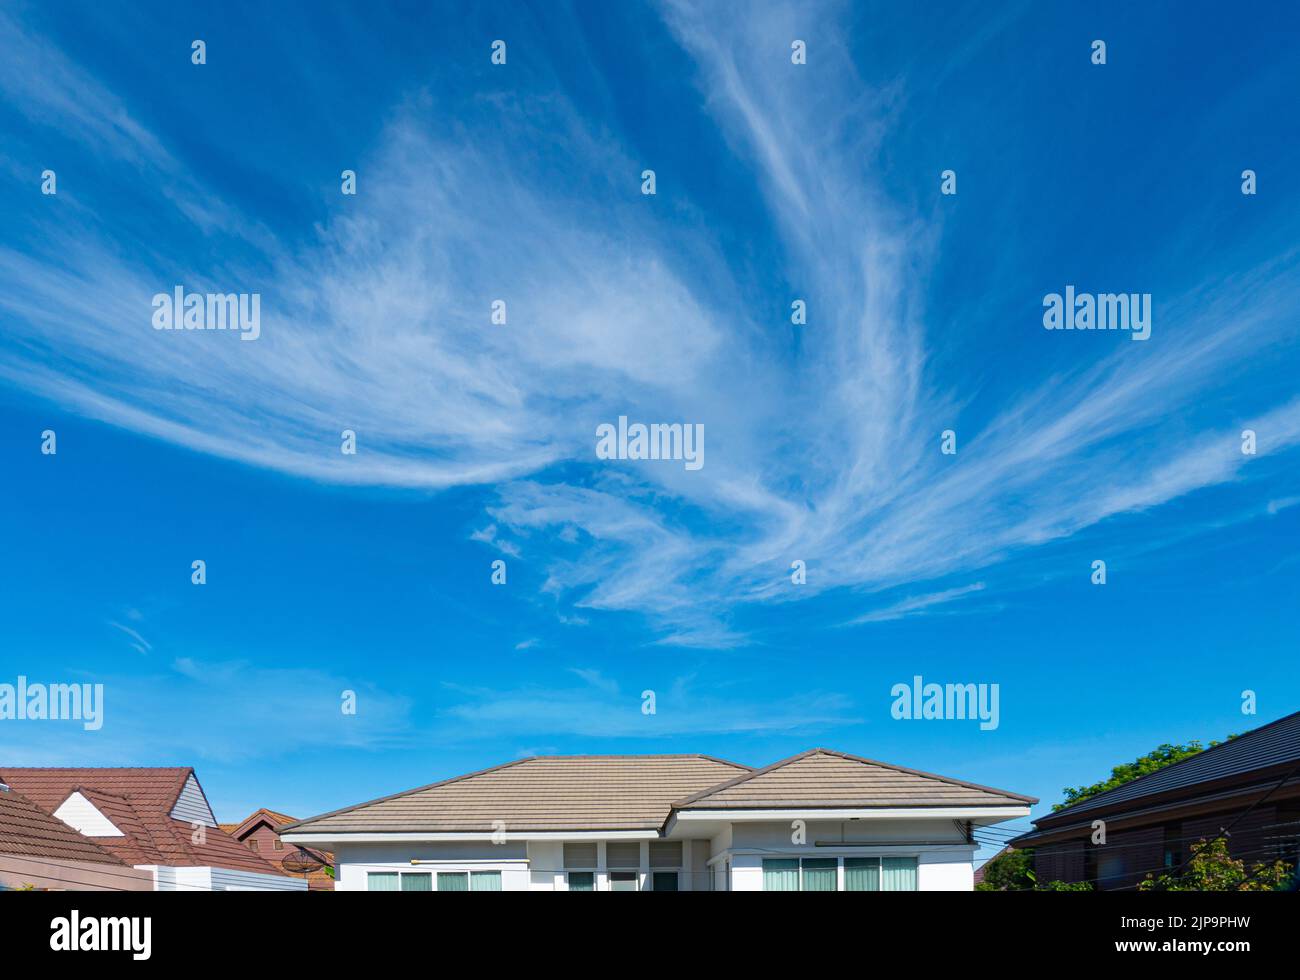 The roof of the house is in the weather on a sunny day with a clear sky. Stock Photo